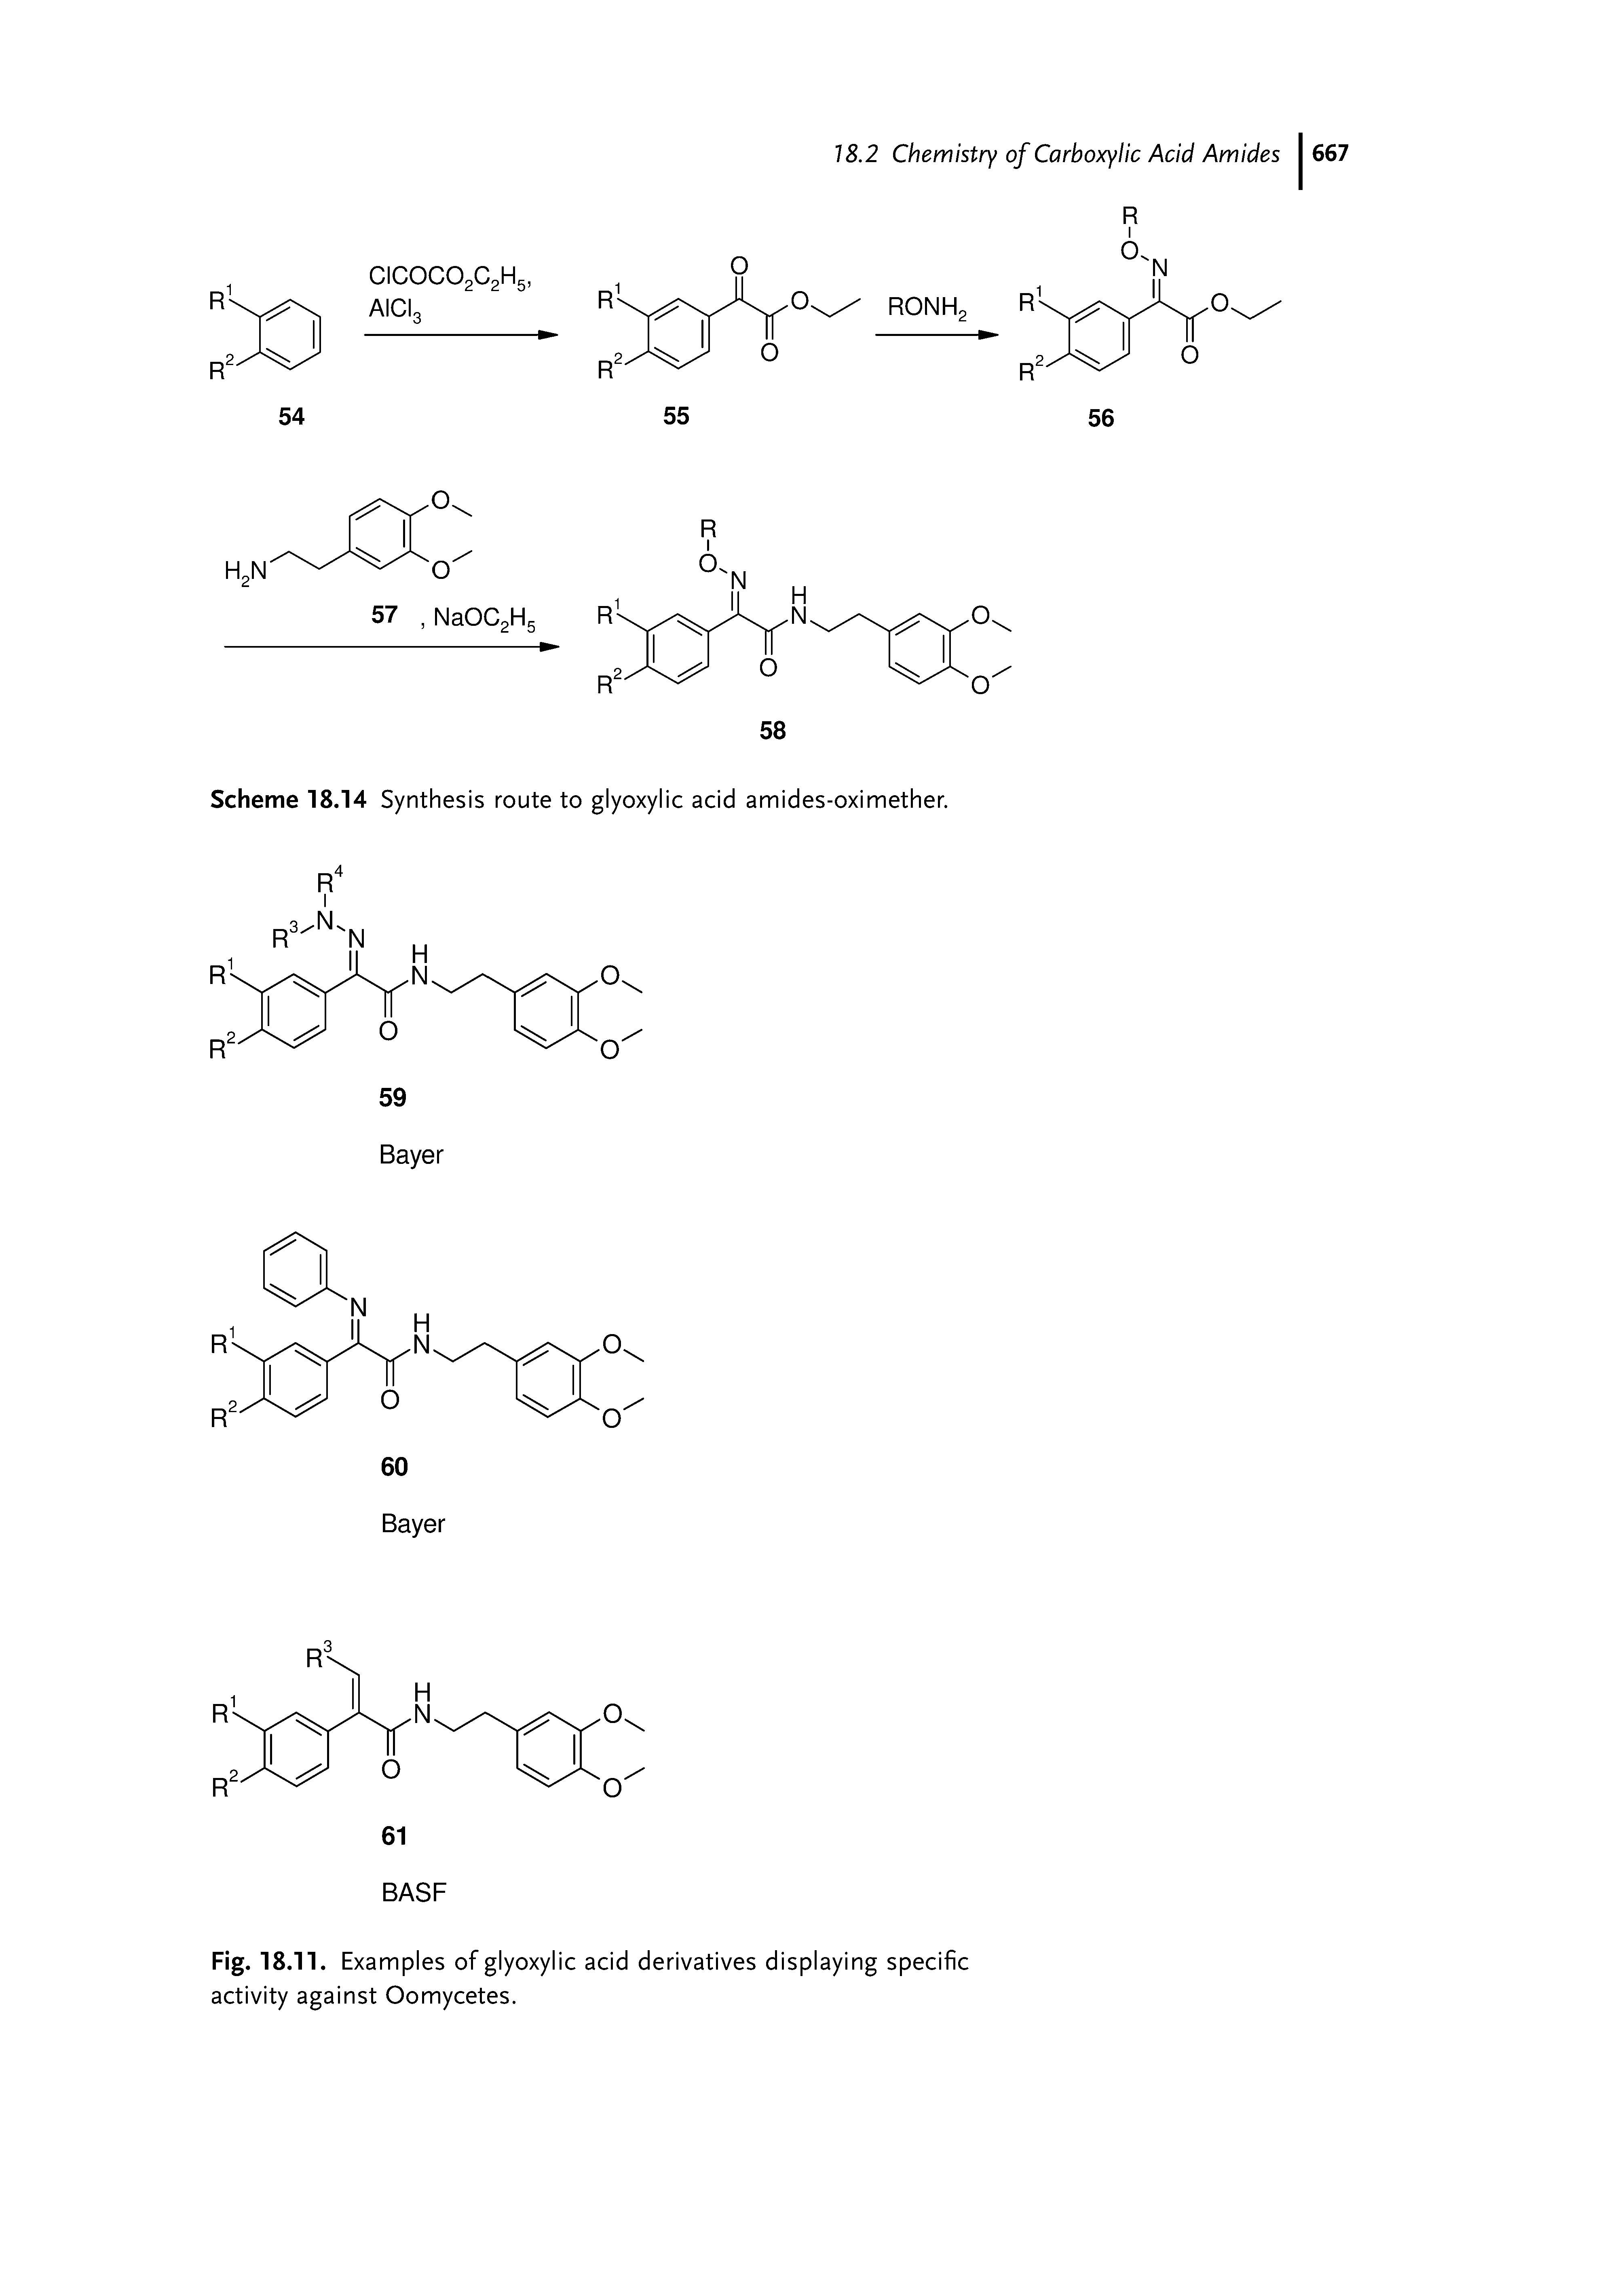 Fig. 18.11. Examples of glyoxylic acid derivatives displaying specific activity against Oomycetes.